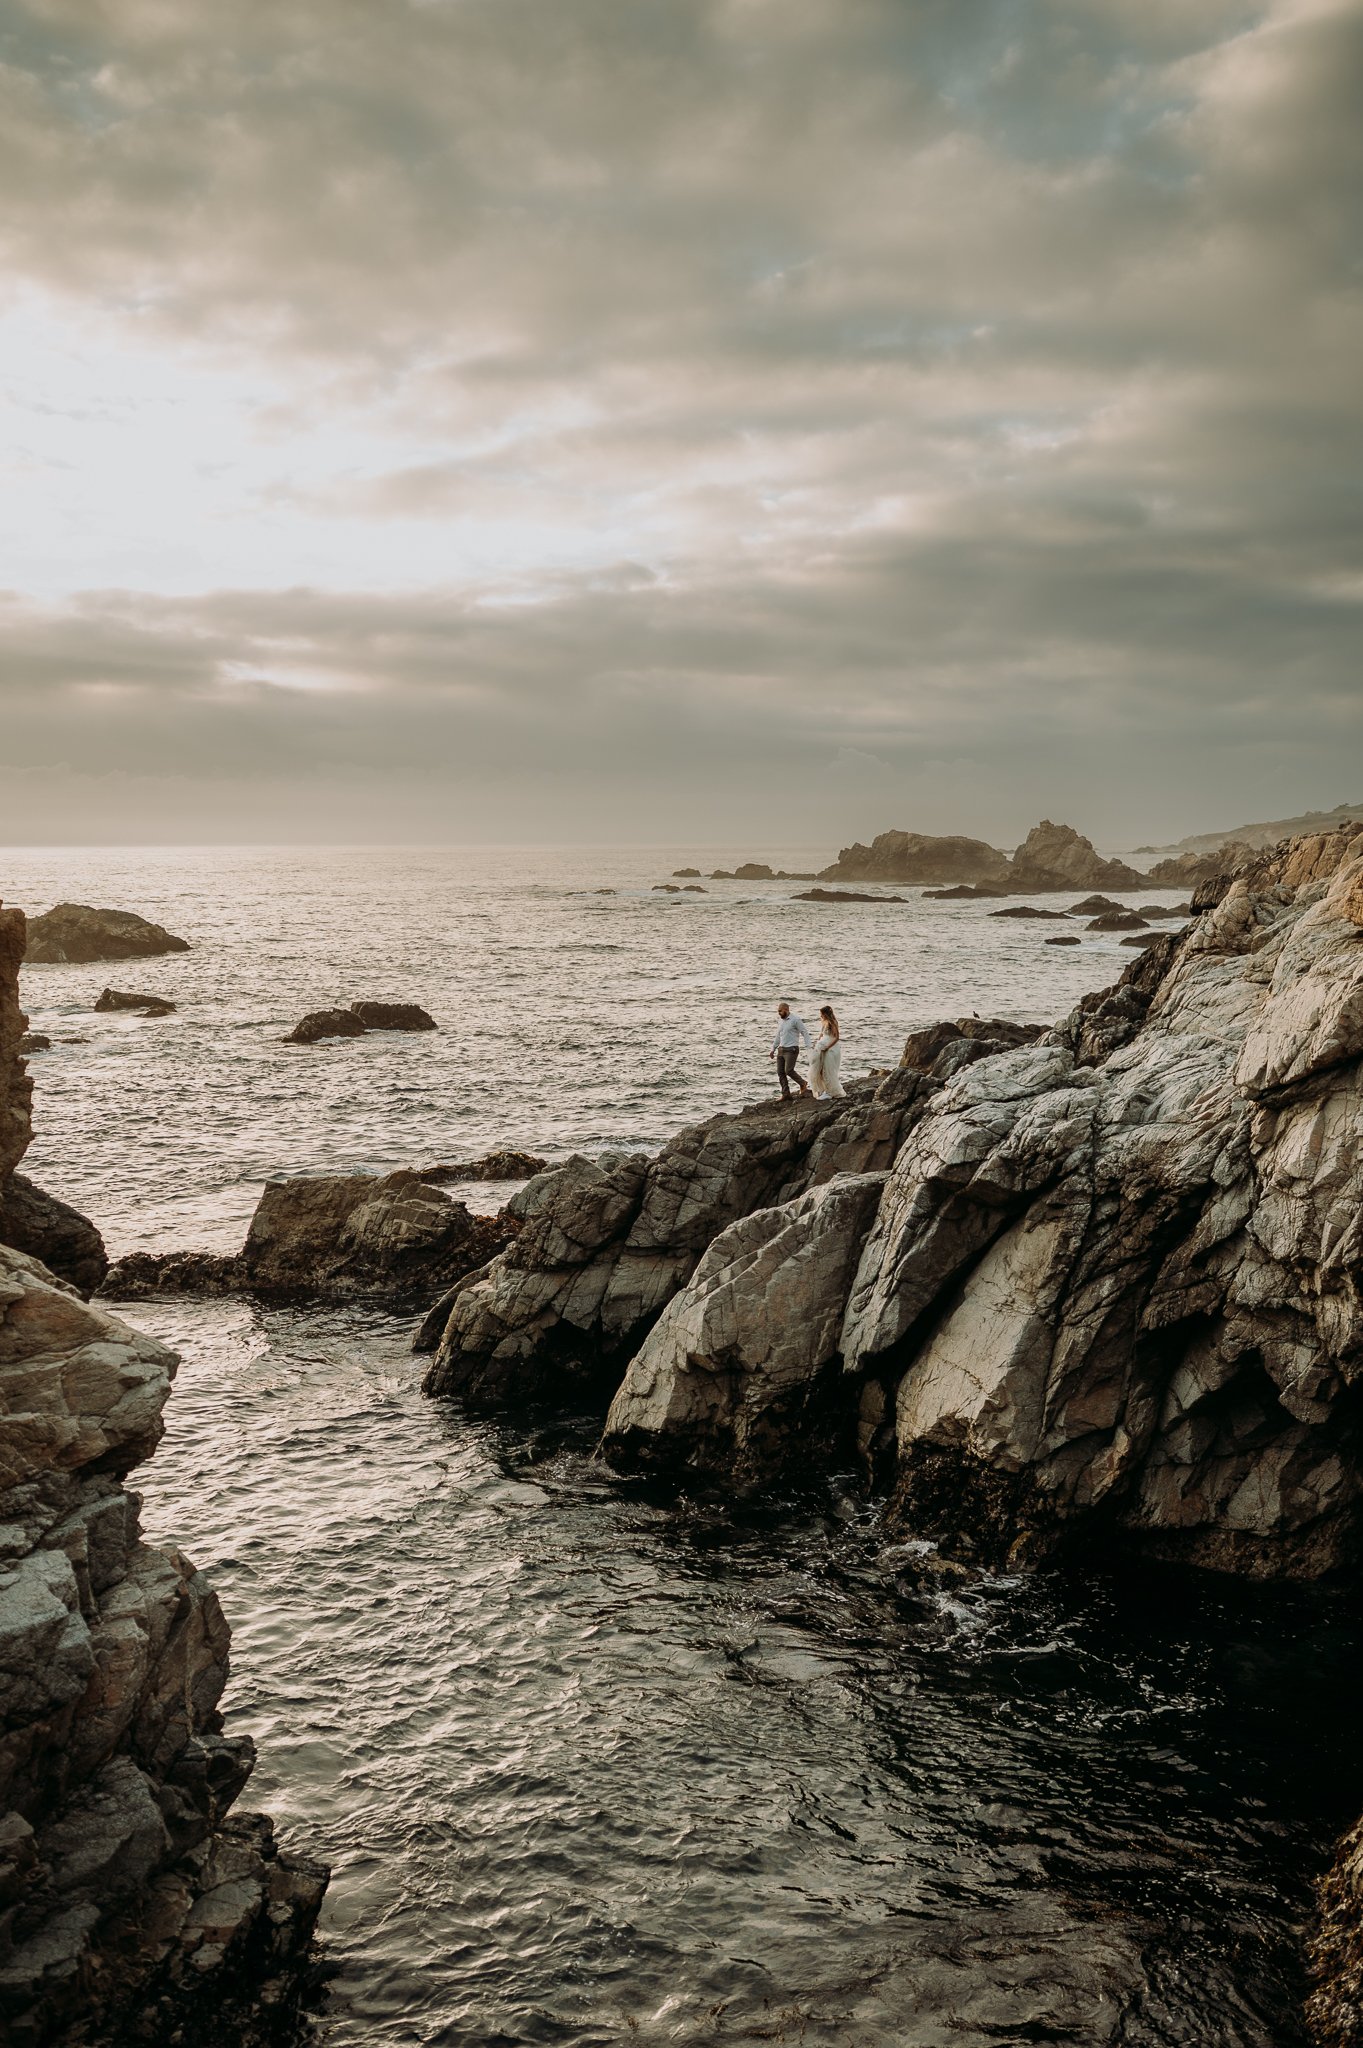 newly married couple walking out to edge of cliff holding hands in wedding dress and suit pacific ocean and moody grey skies in background 